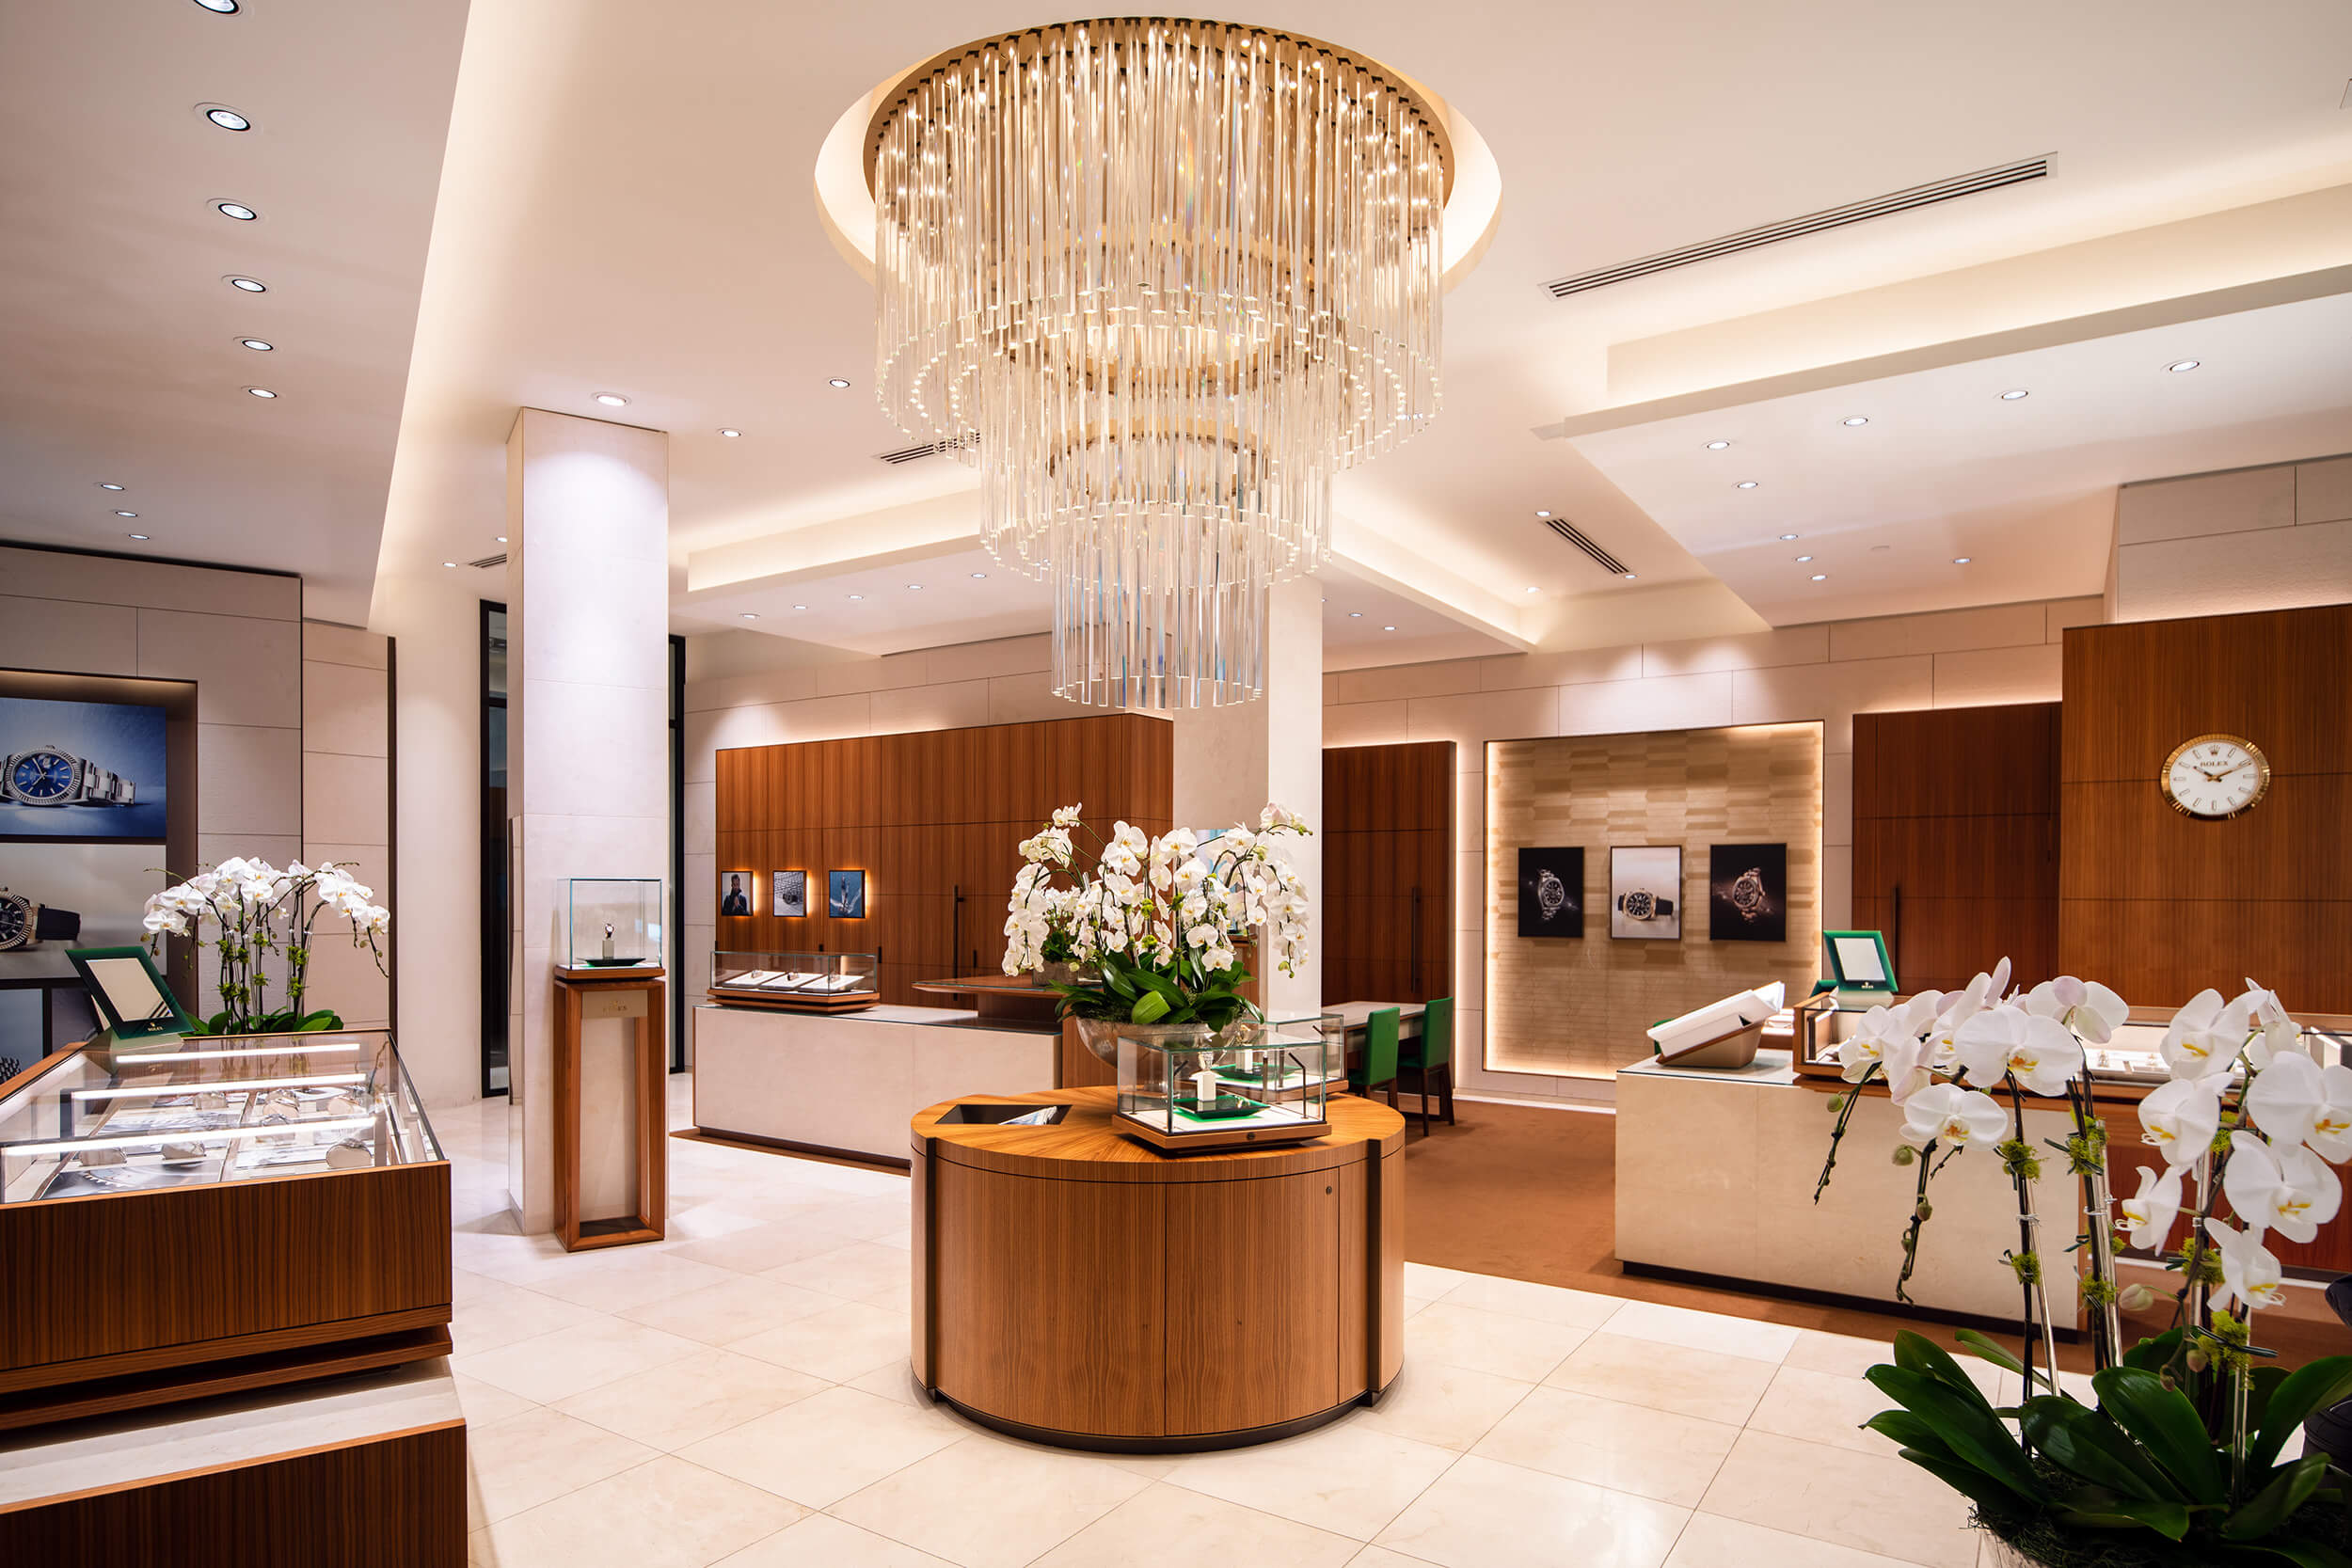 Elegant jewelry store interior with wooden display counters, a striking chandelier, and orchids, under warm lighting.